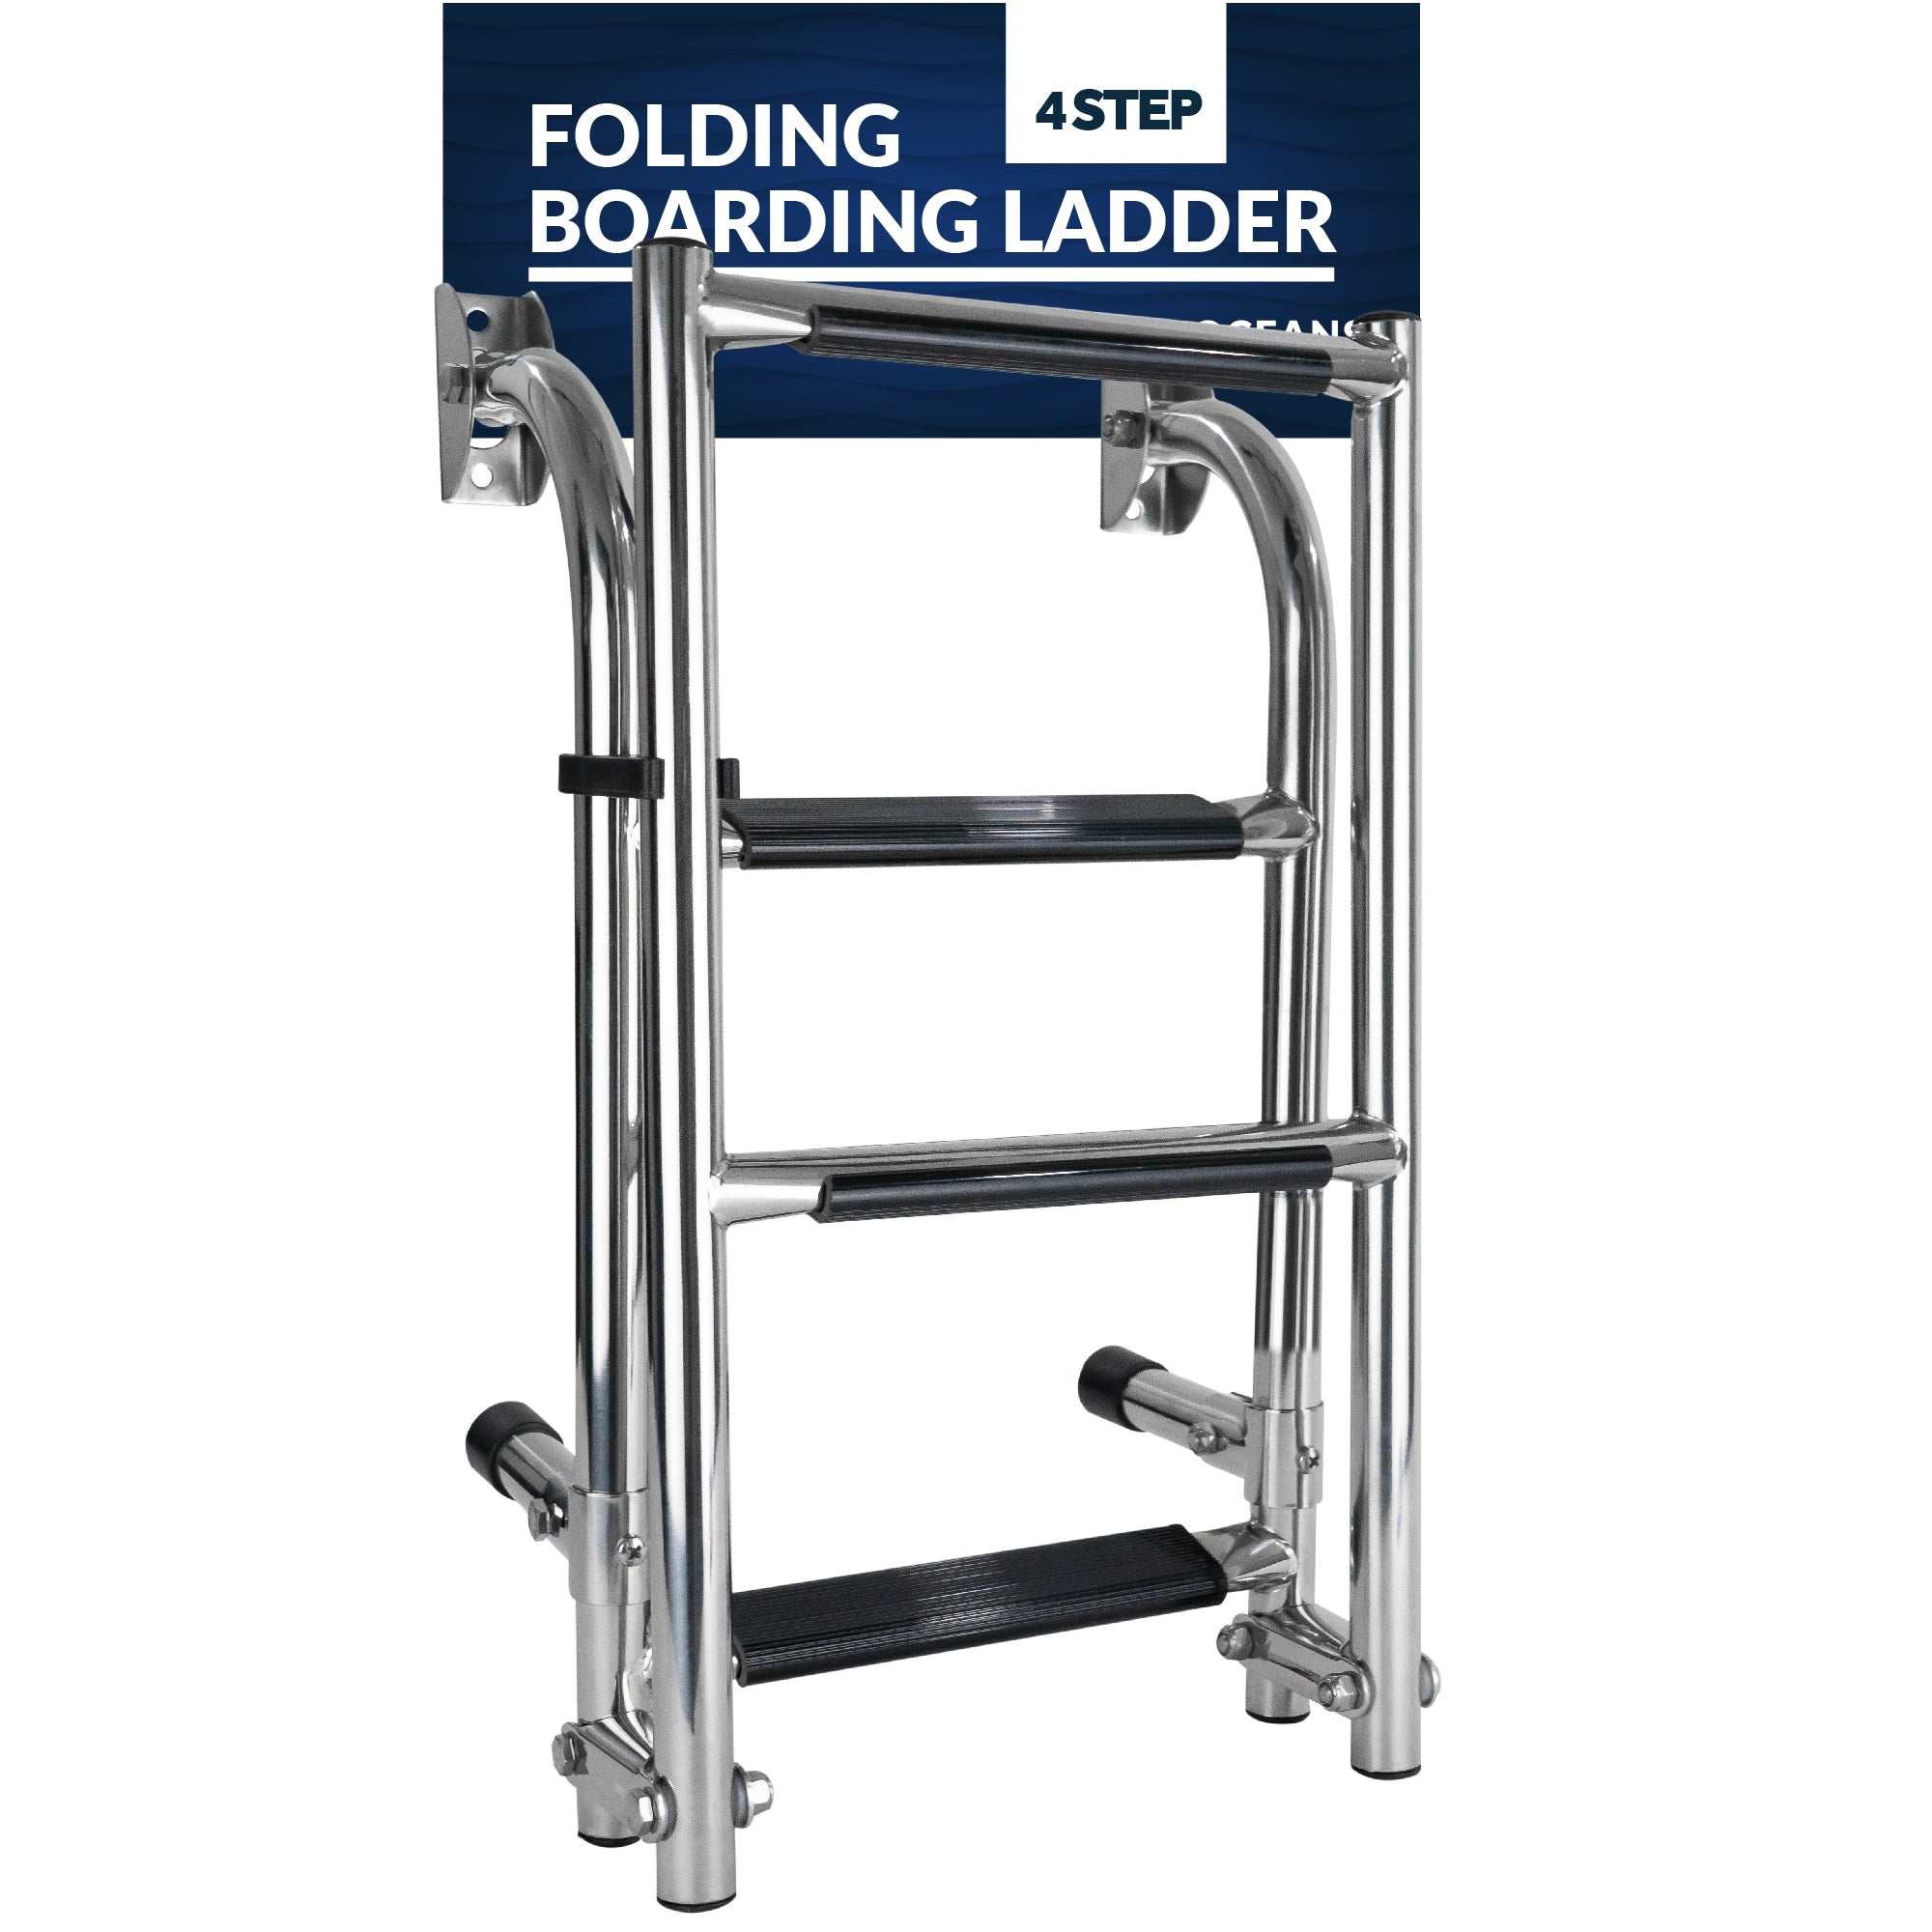 4 Step Boat Folding Ladder, Stainless Steel - FO4500